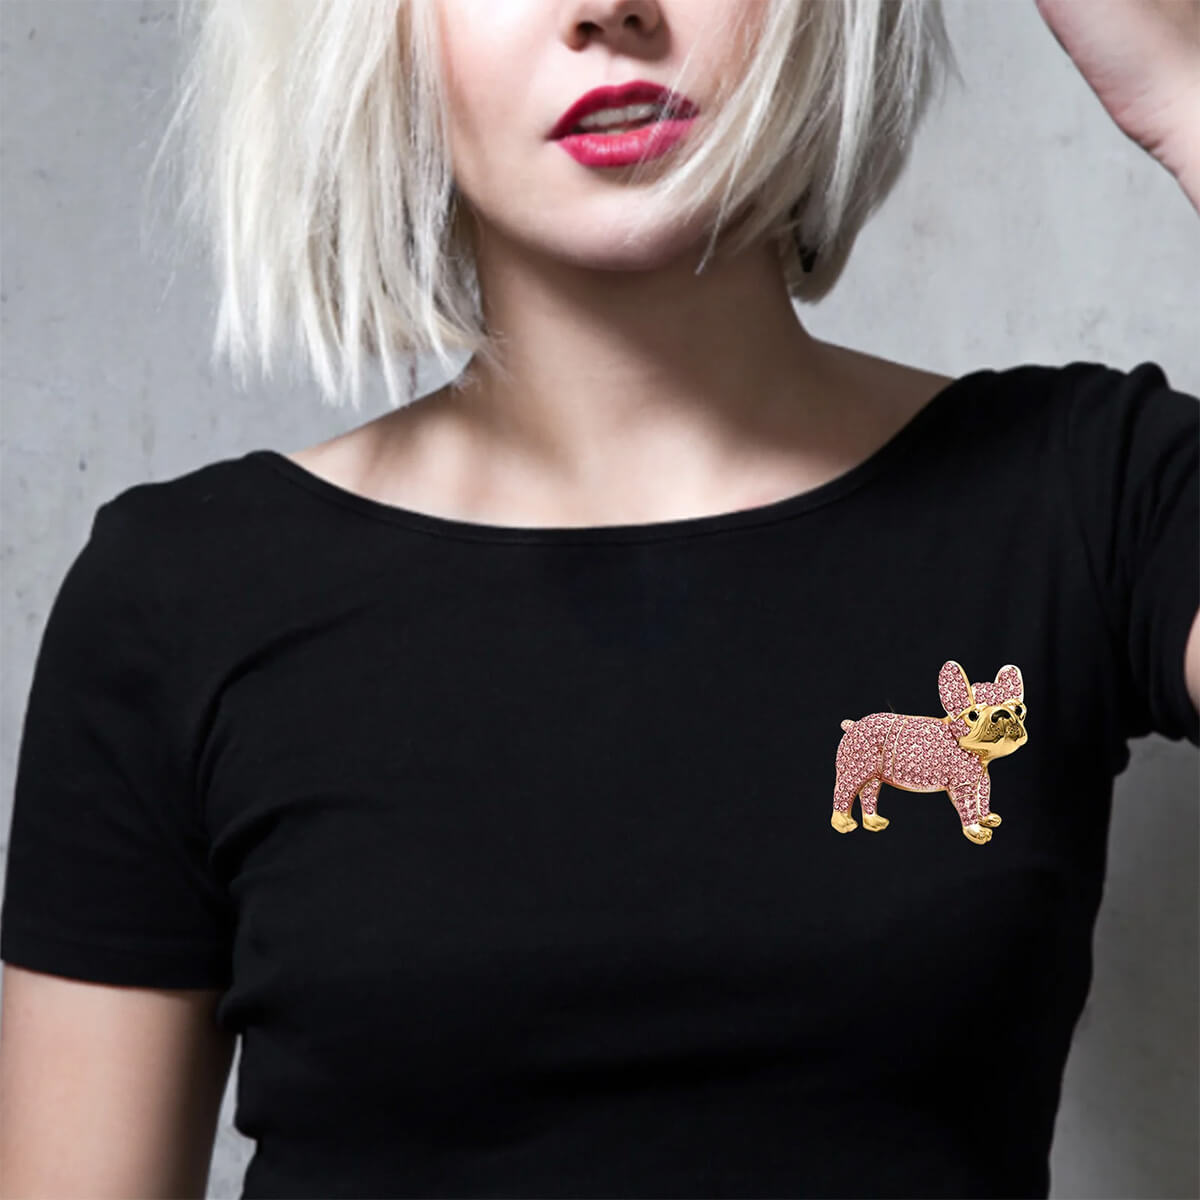 Woman model wearing pink Iced Out French Bulldog Brooch on a black t shirt